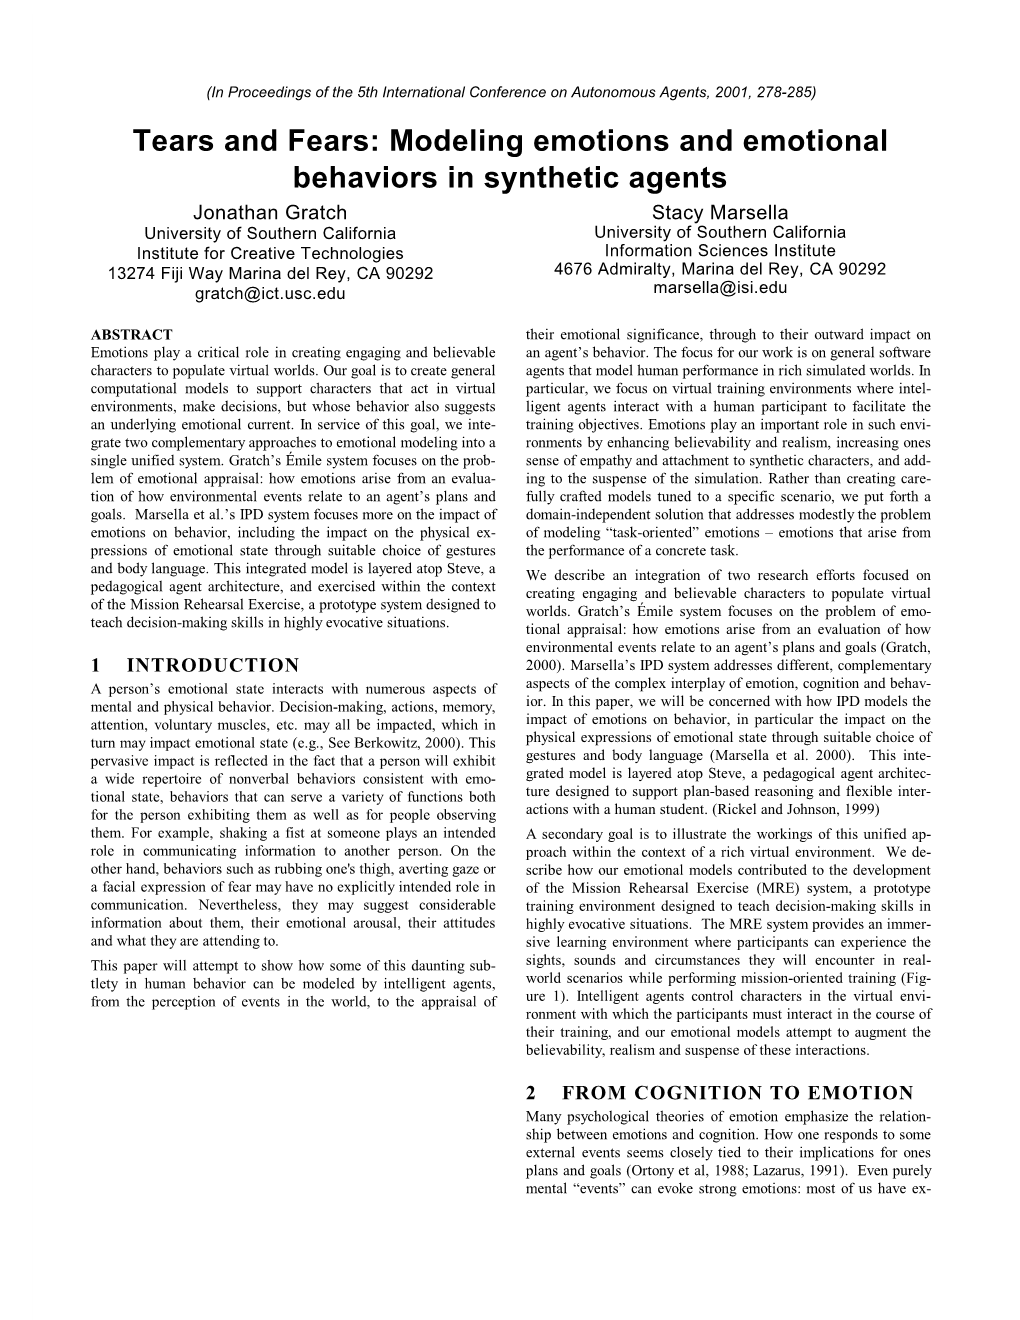 Modeling Emotions and Emotional Behaviors in Synthetic Agents